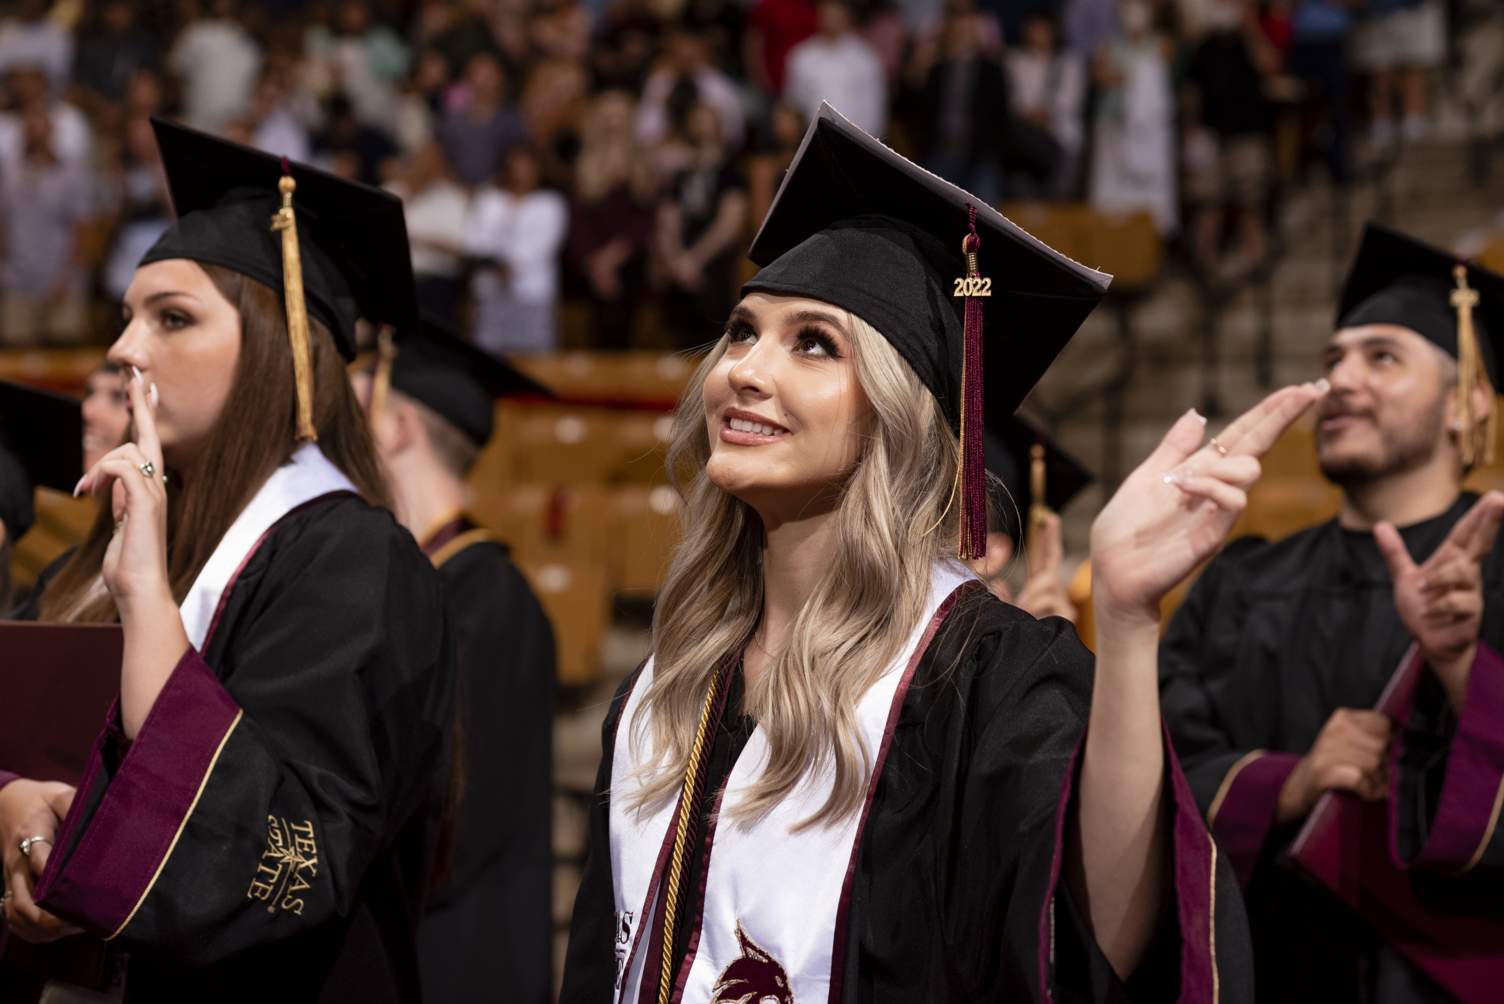 Grads holding up the show-em-state hand sign